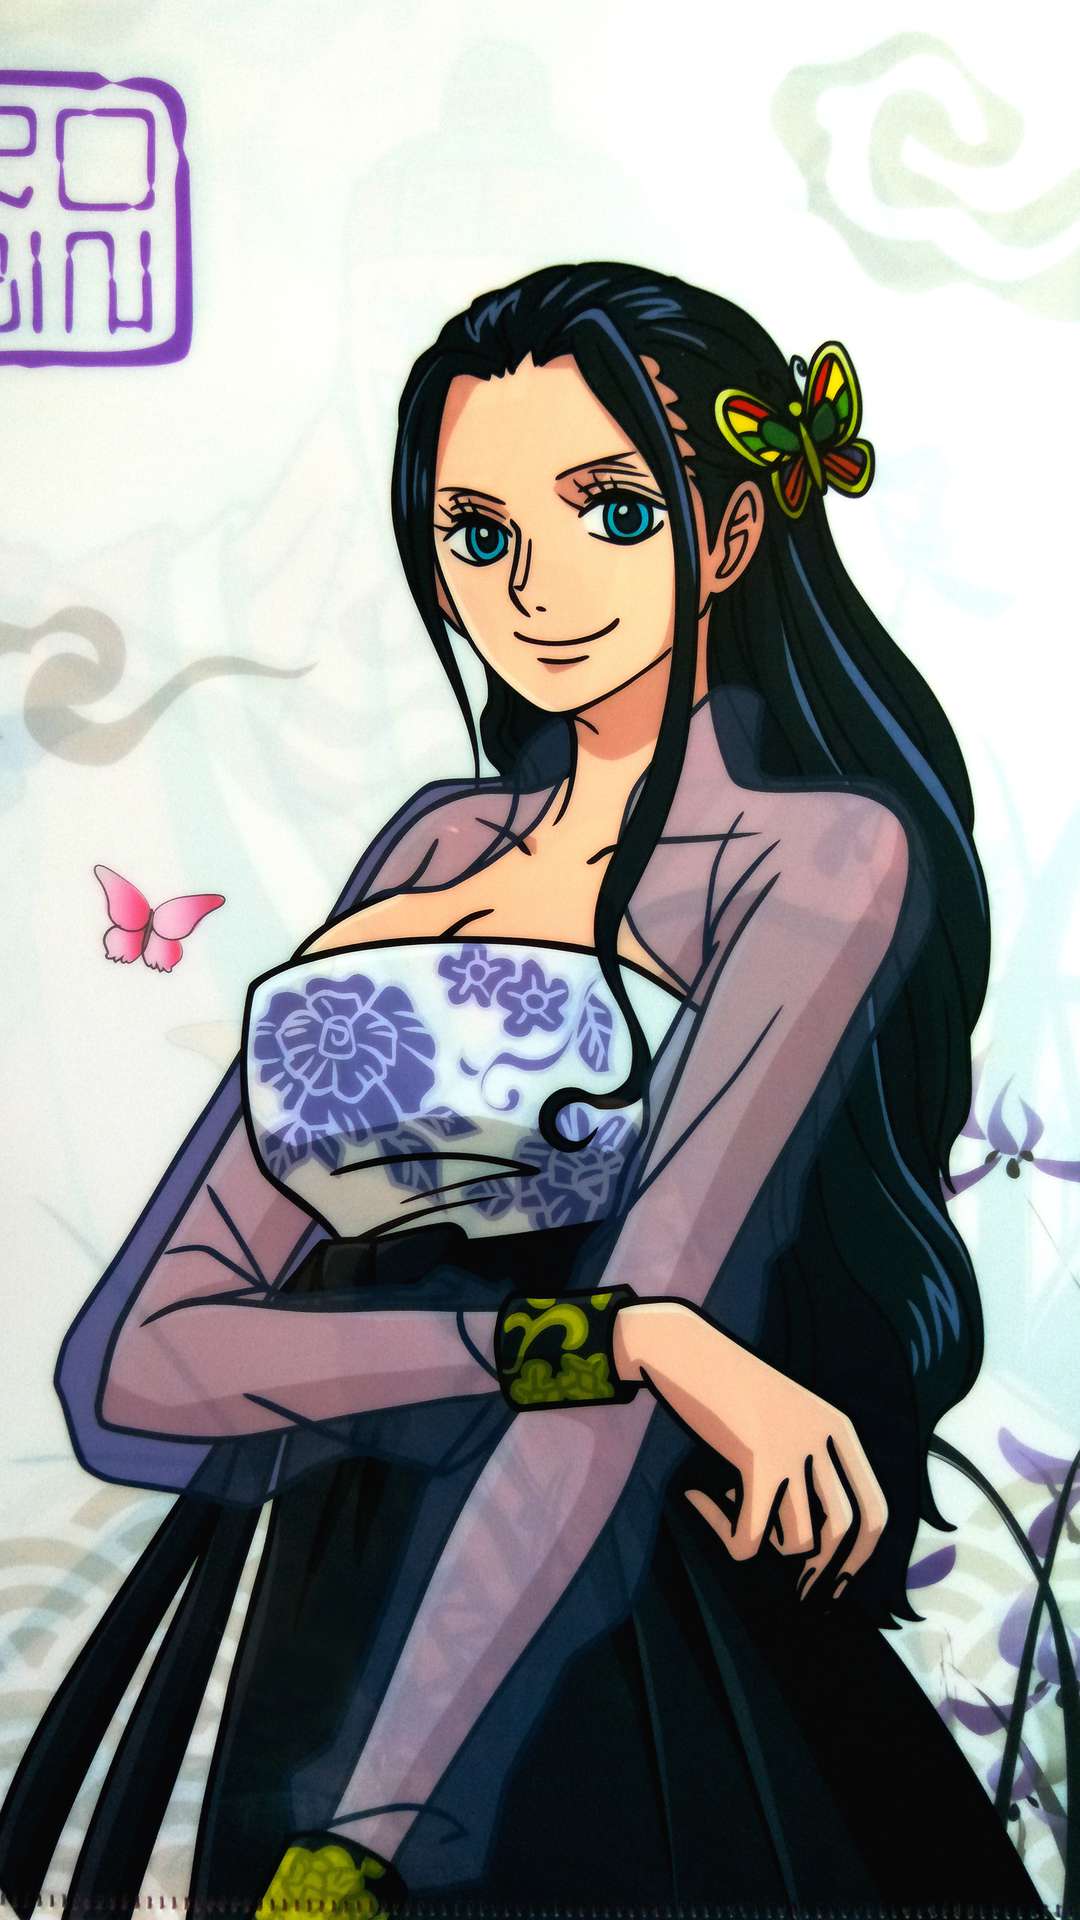 19 Nico Robin Wallpapers for iPhone and Android by Carla Carrillo